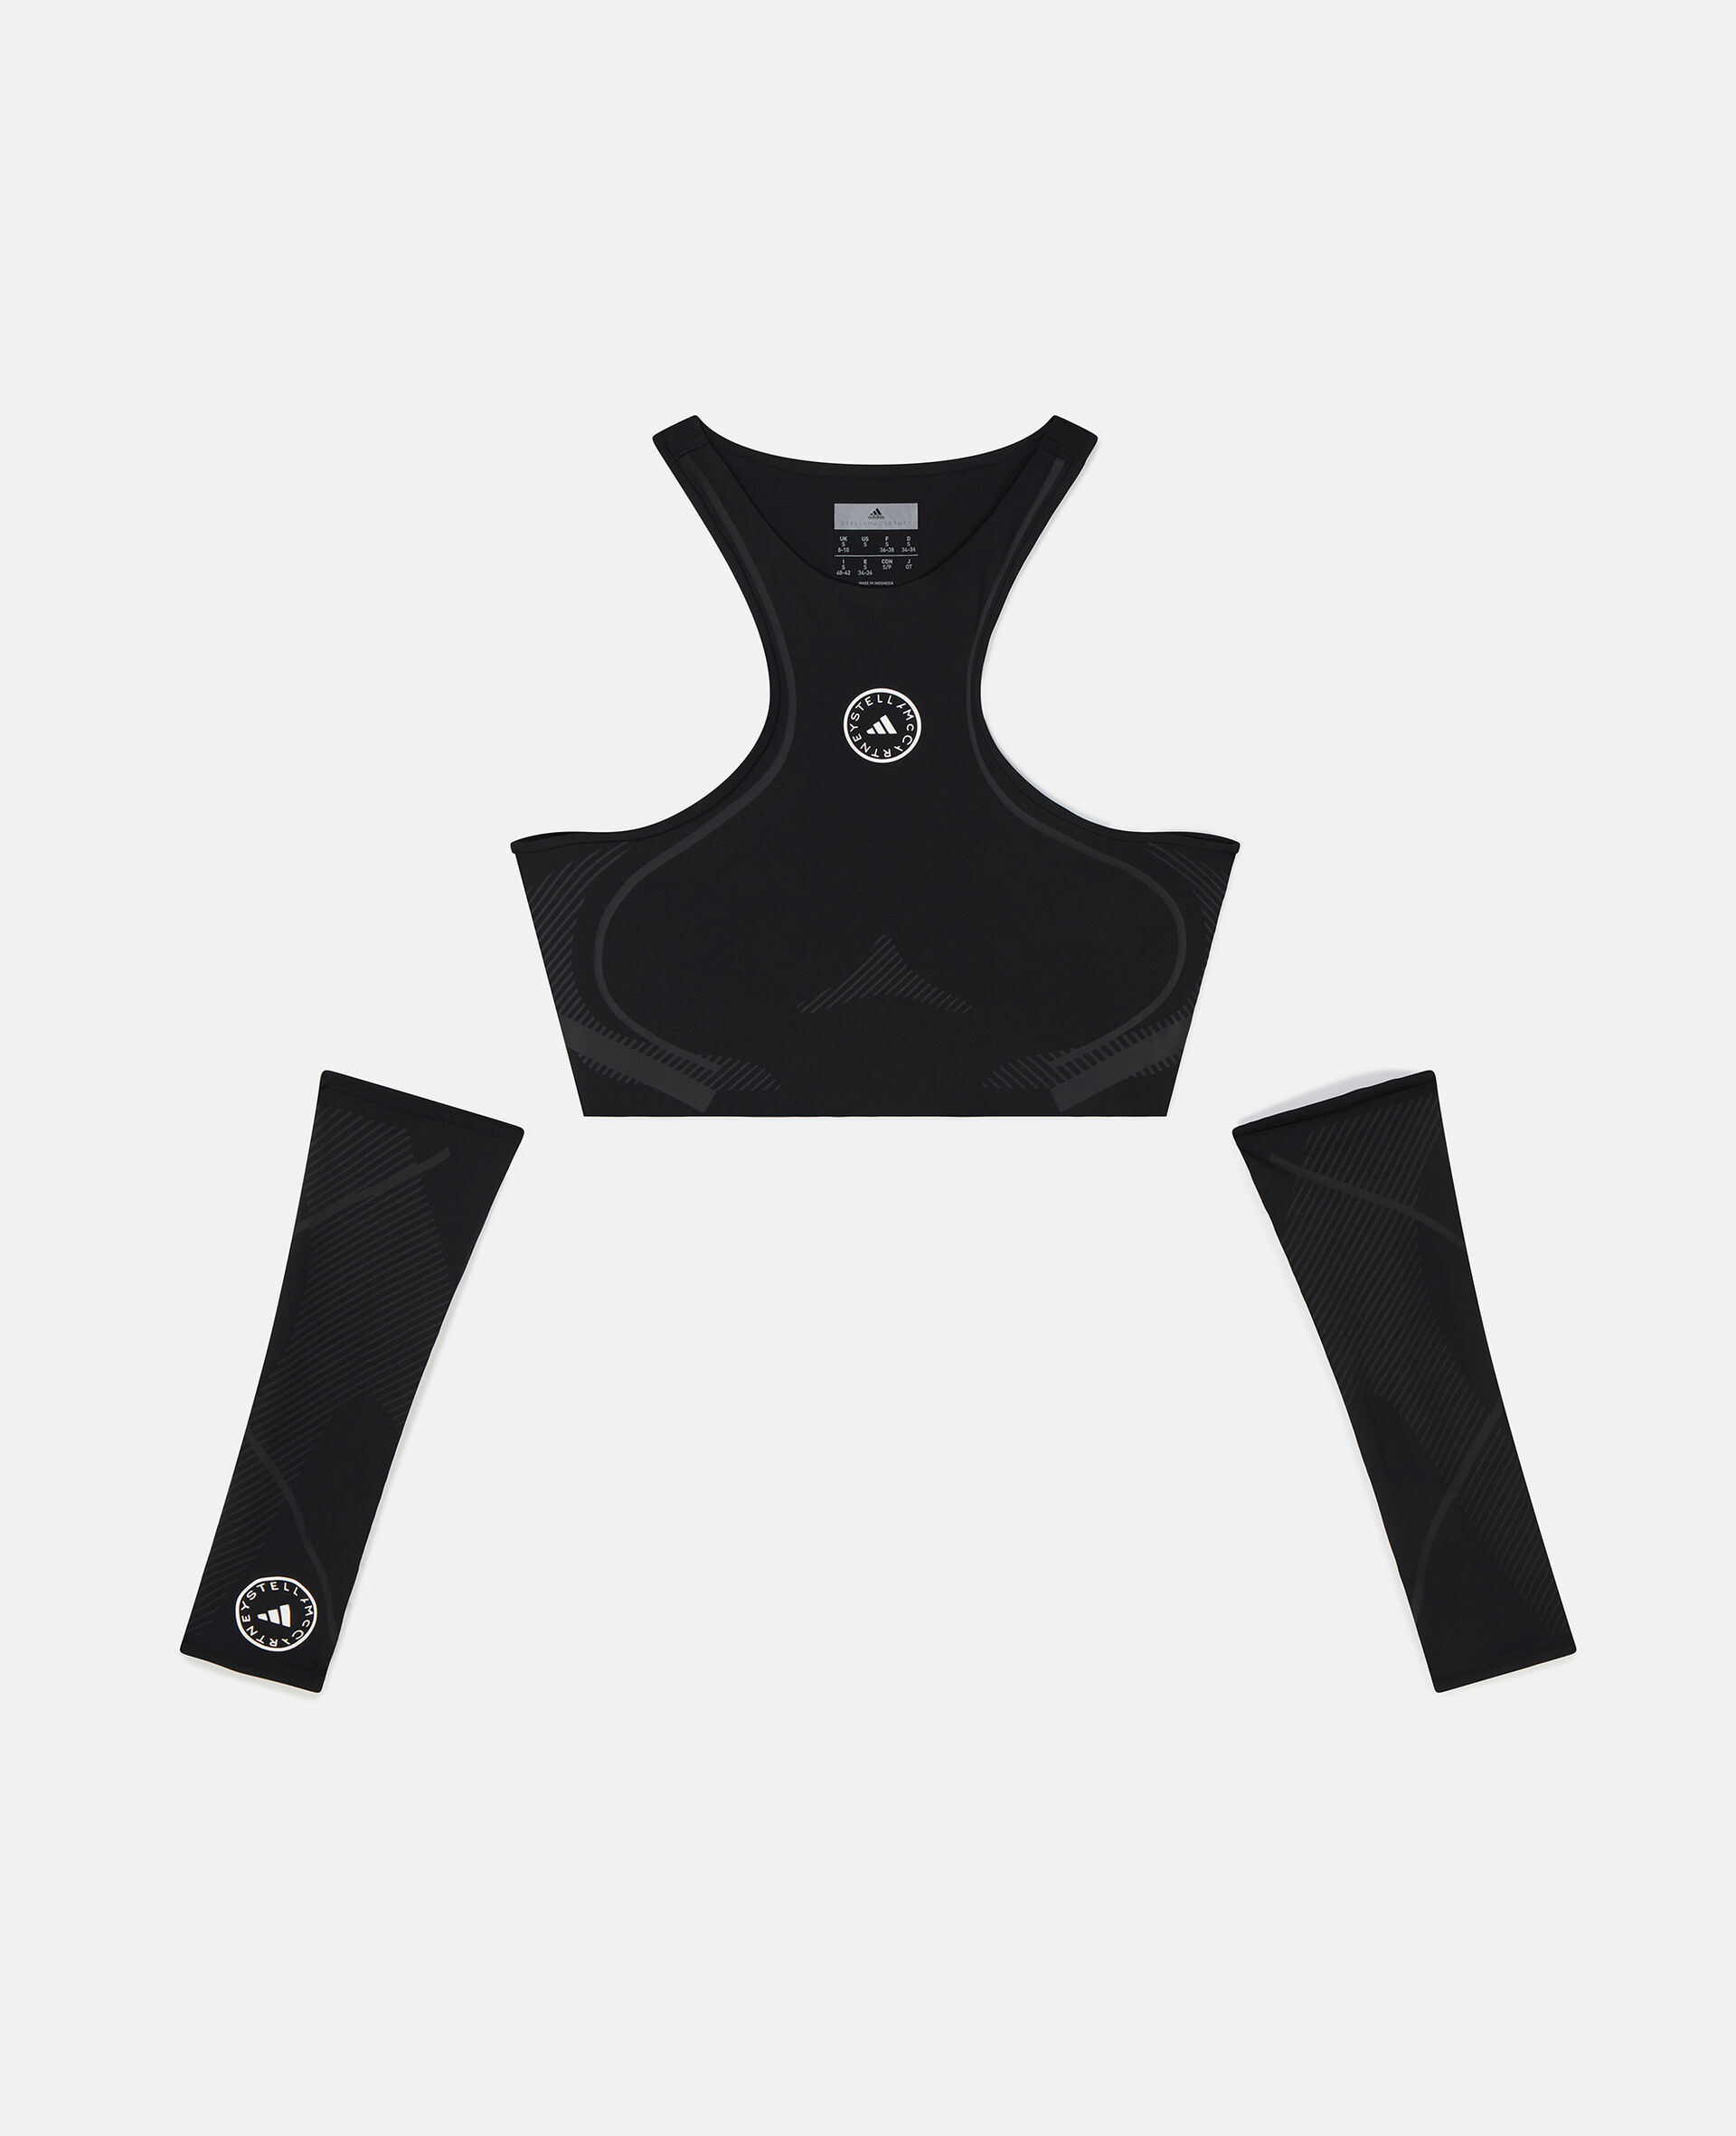 TruePace Running Crop Top with Arm Guards-Black-large image number 0